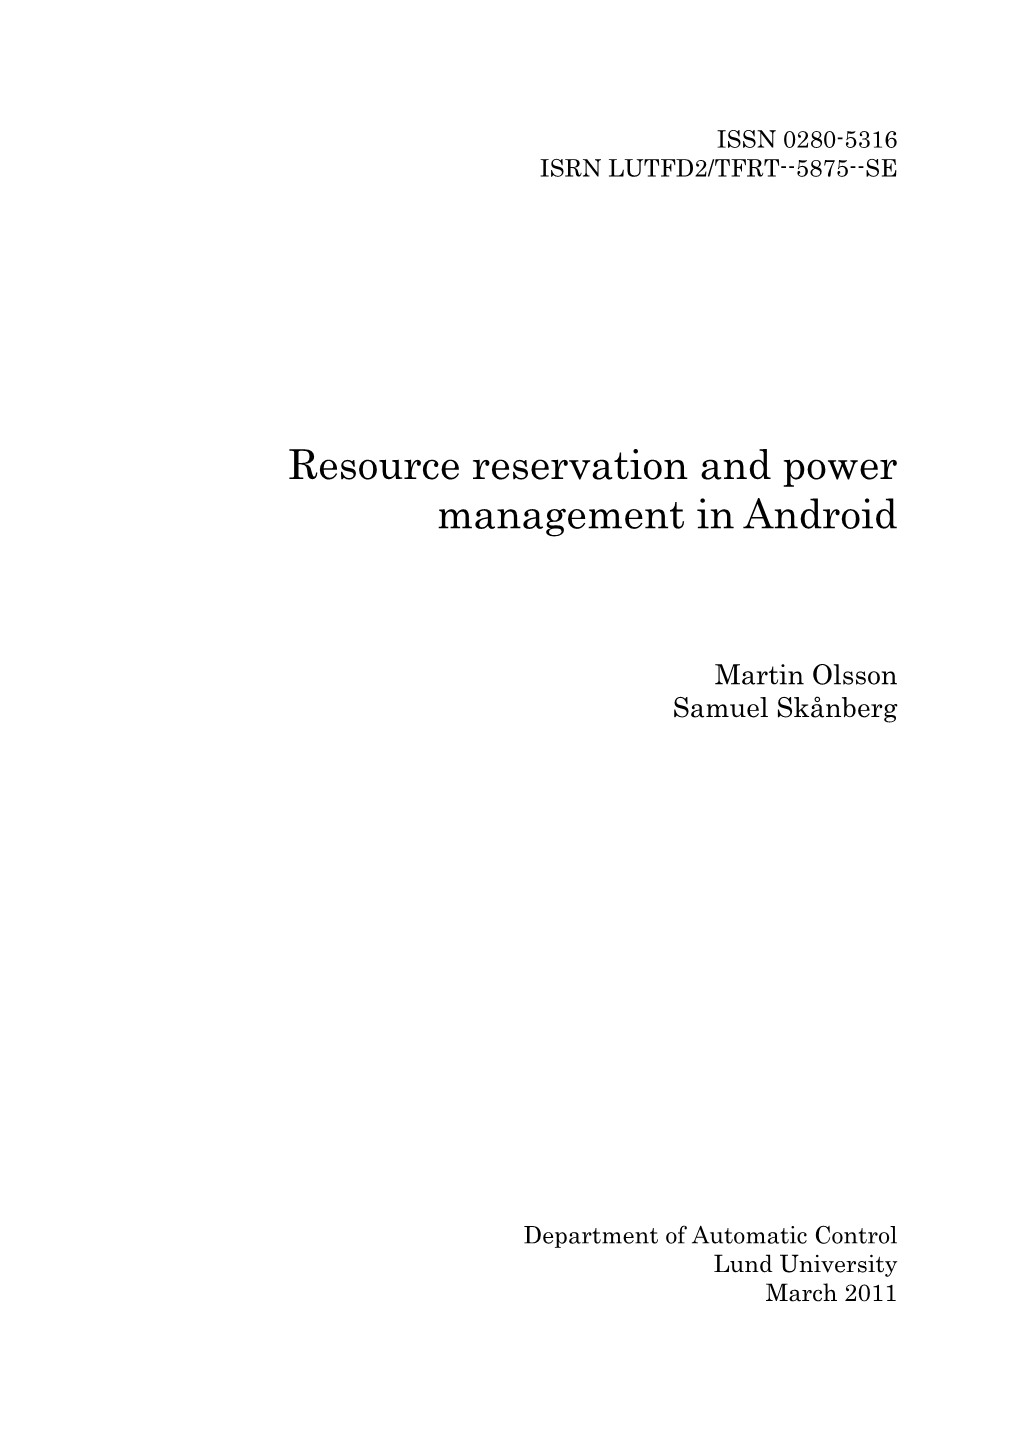 Resource Reservation and Power Management in Android